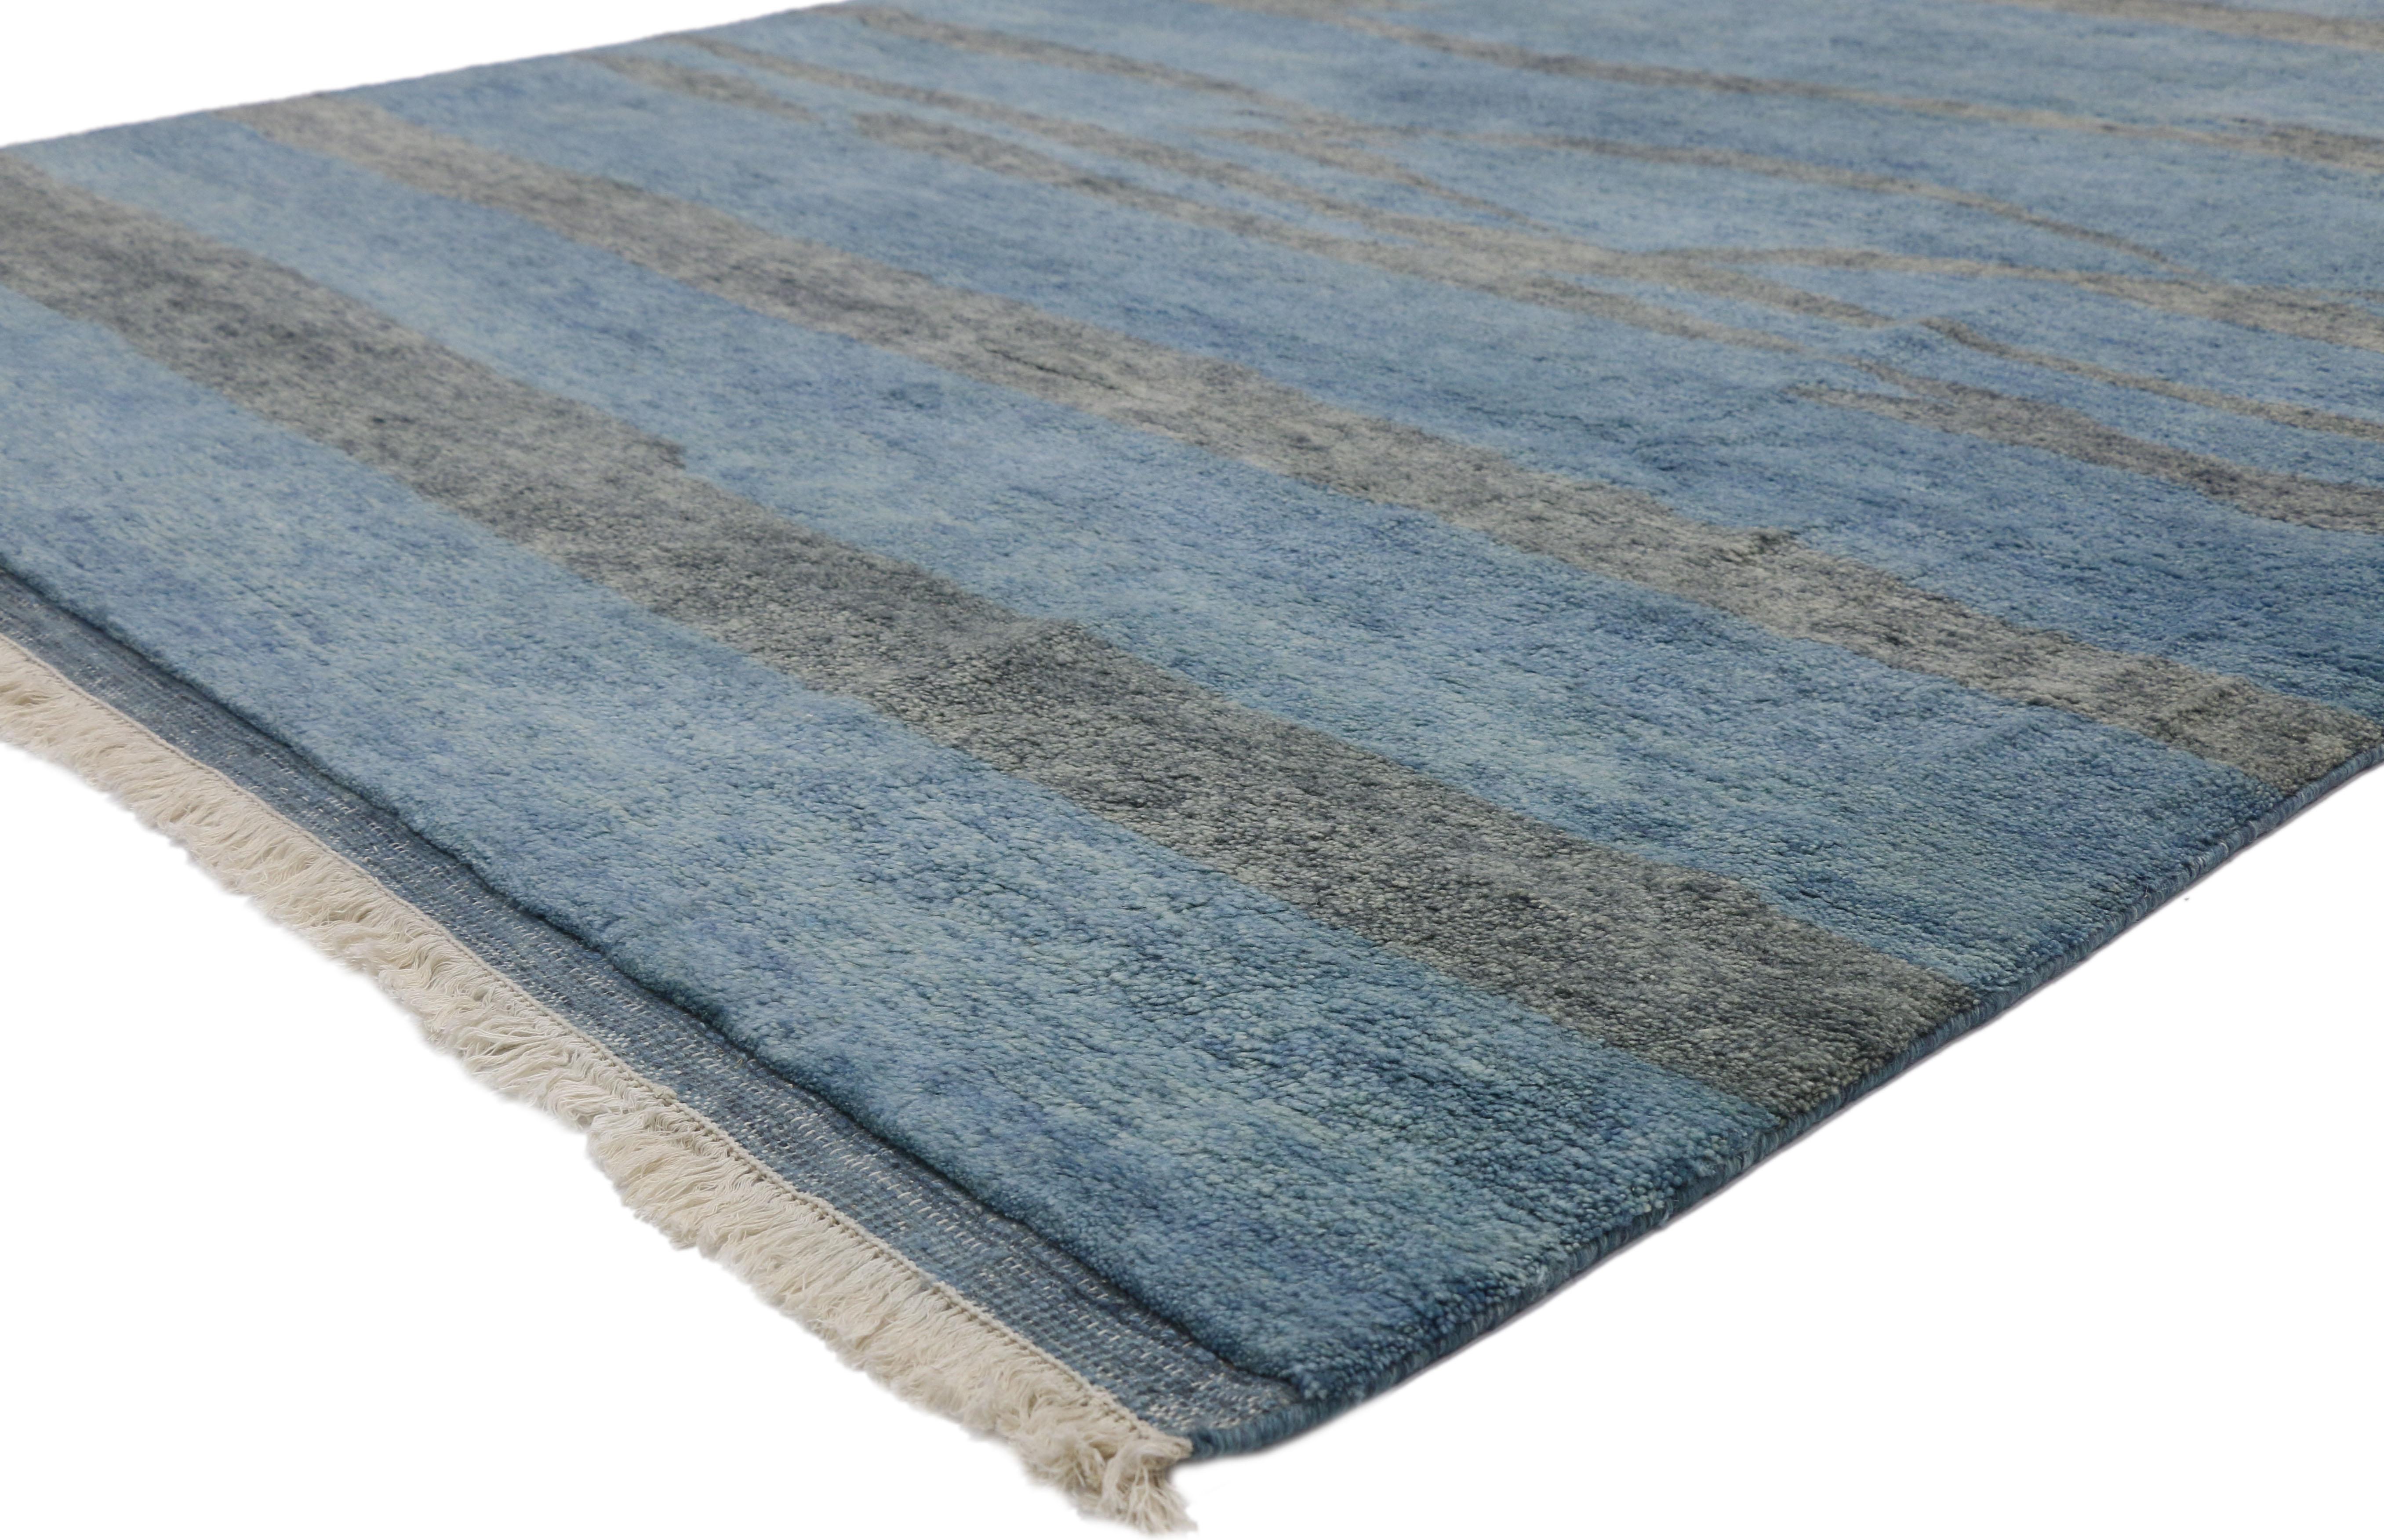 30499 New Contemporary Moroccan Area Rug with Coastal Boho Chic Style 08'06 x 10'00. With its simplicity, coastal colors and Bohemian vibes, this hand knotted wool contemporary Moroccan style area rug is a captivating vision of woven beauty. Imbued